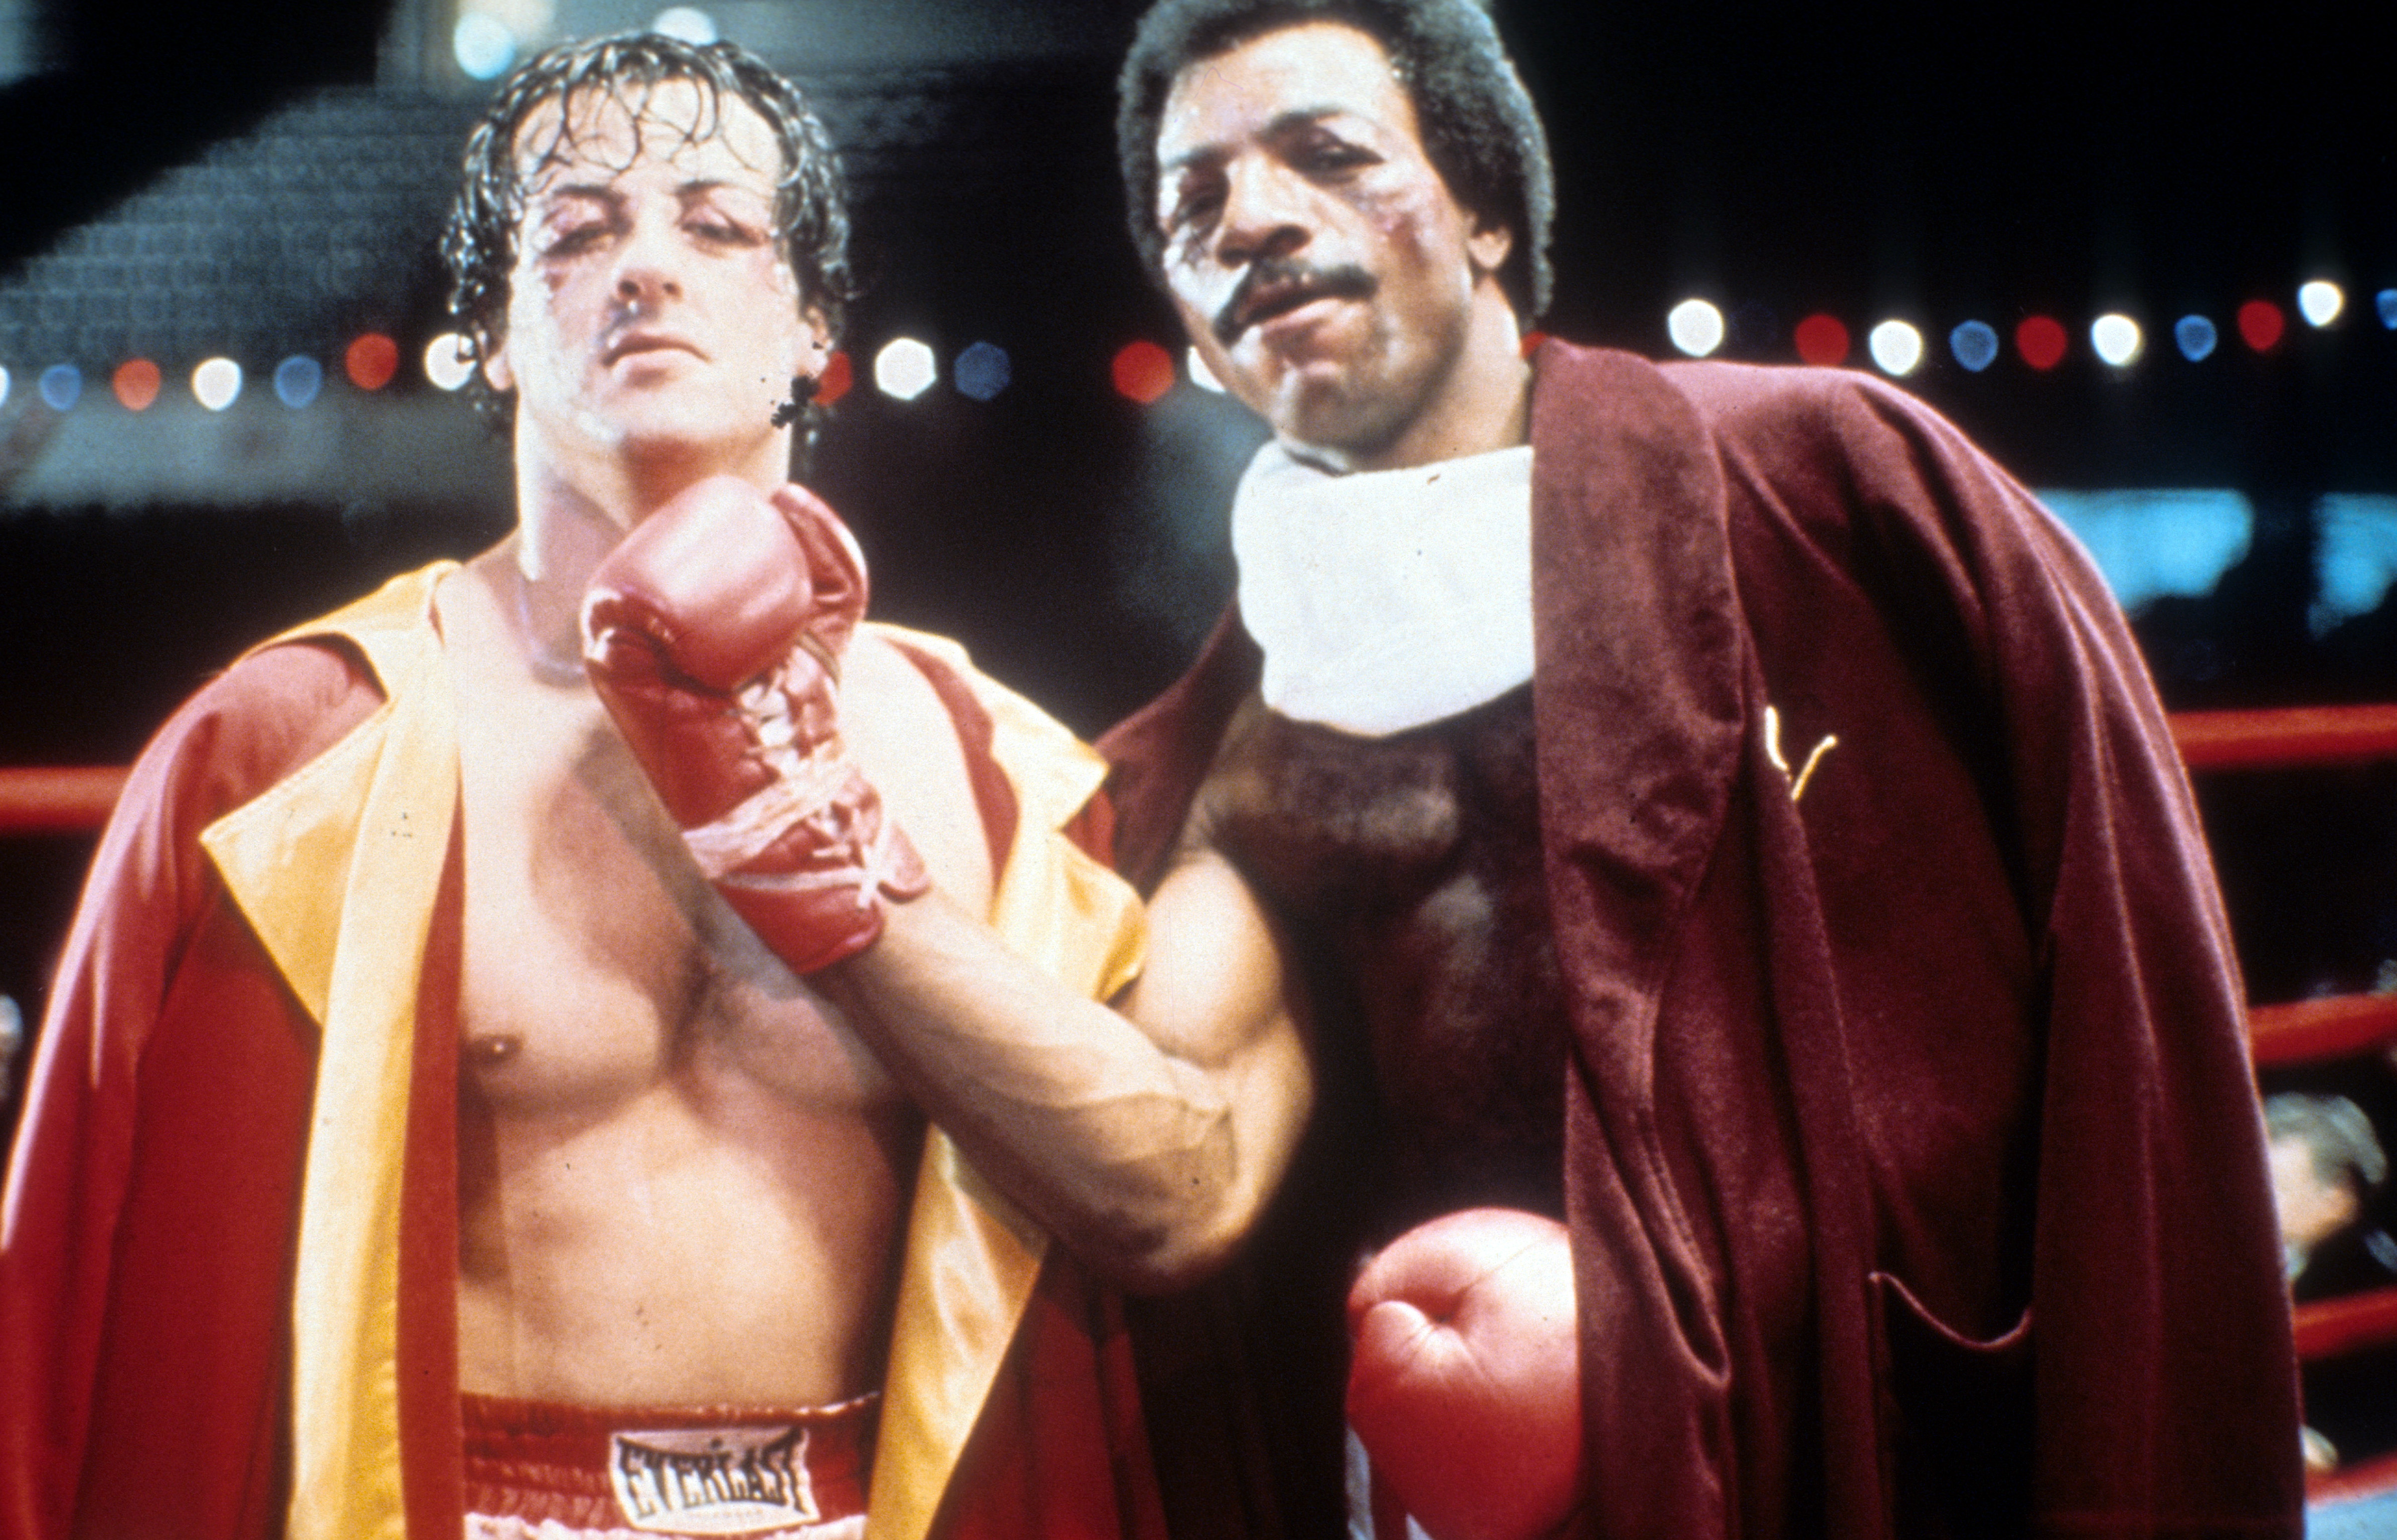 Sylvester Stallone and Carl Weathers on set of the film ‘Rocky’ in 1976